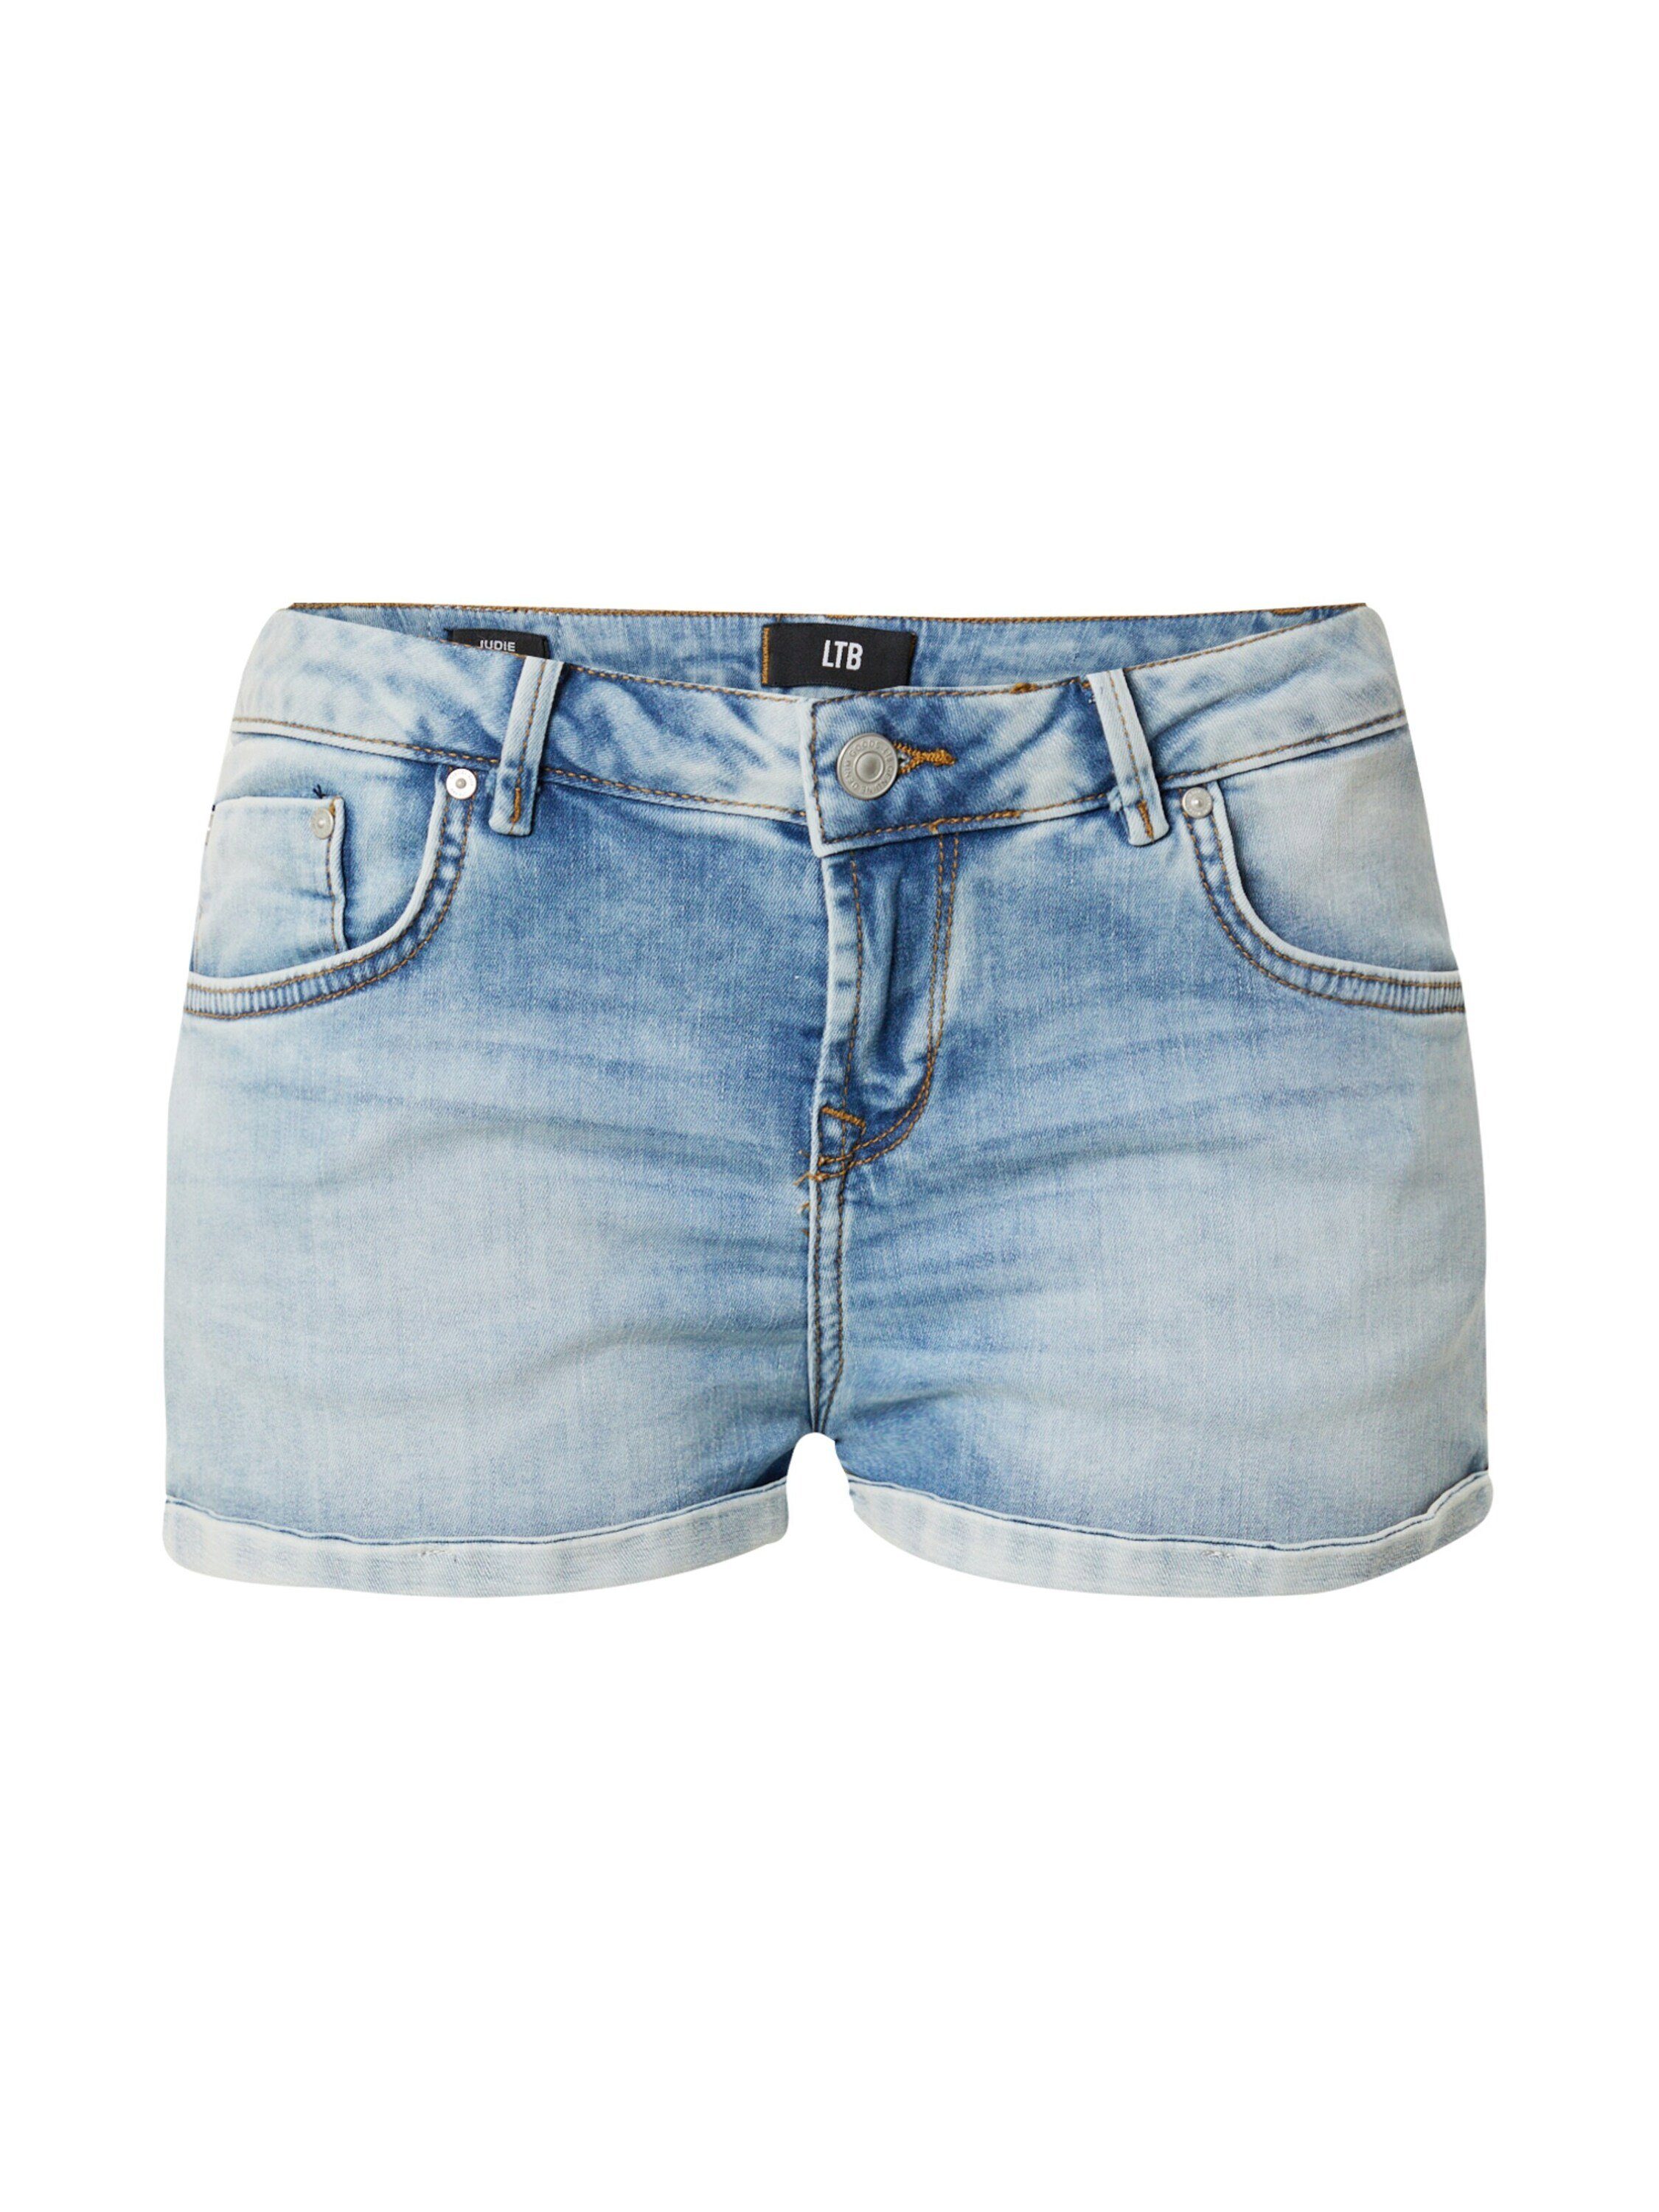 LTB Jeansshorts Weiteres (1-tlg) Judie Patches, Detail